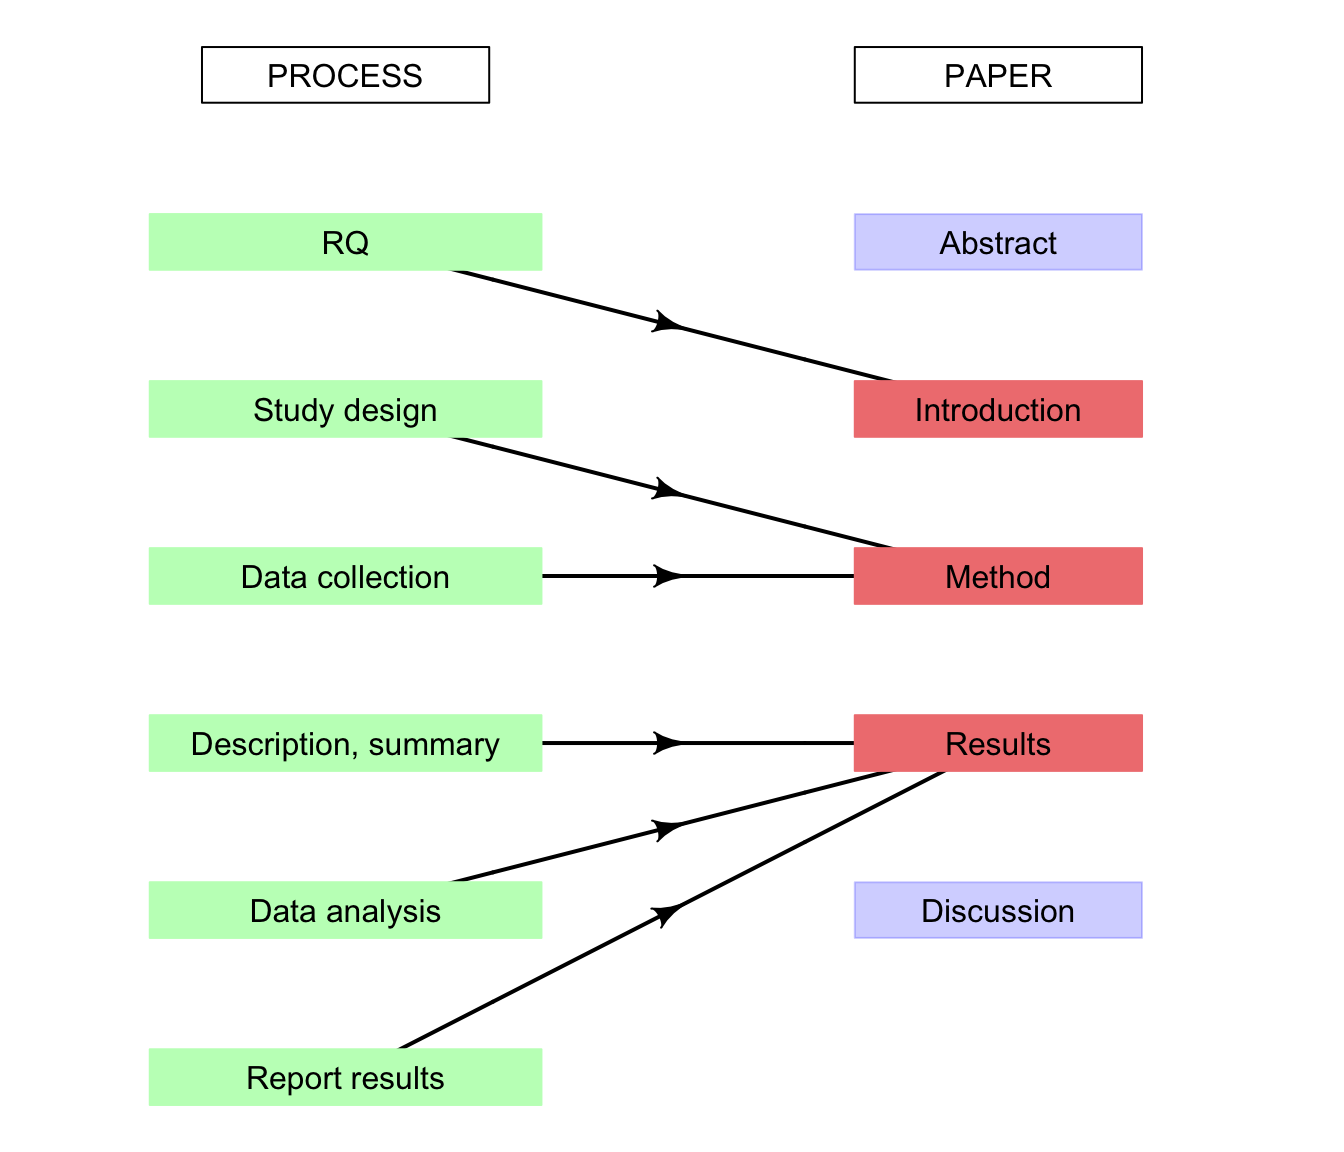 The connection between the paper and the steps we have studied.  The Abstract briefly covers all aspects of the study, and the Discussion combines elements from all areas also.